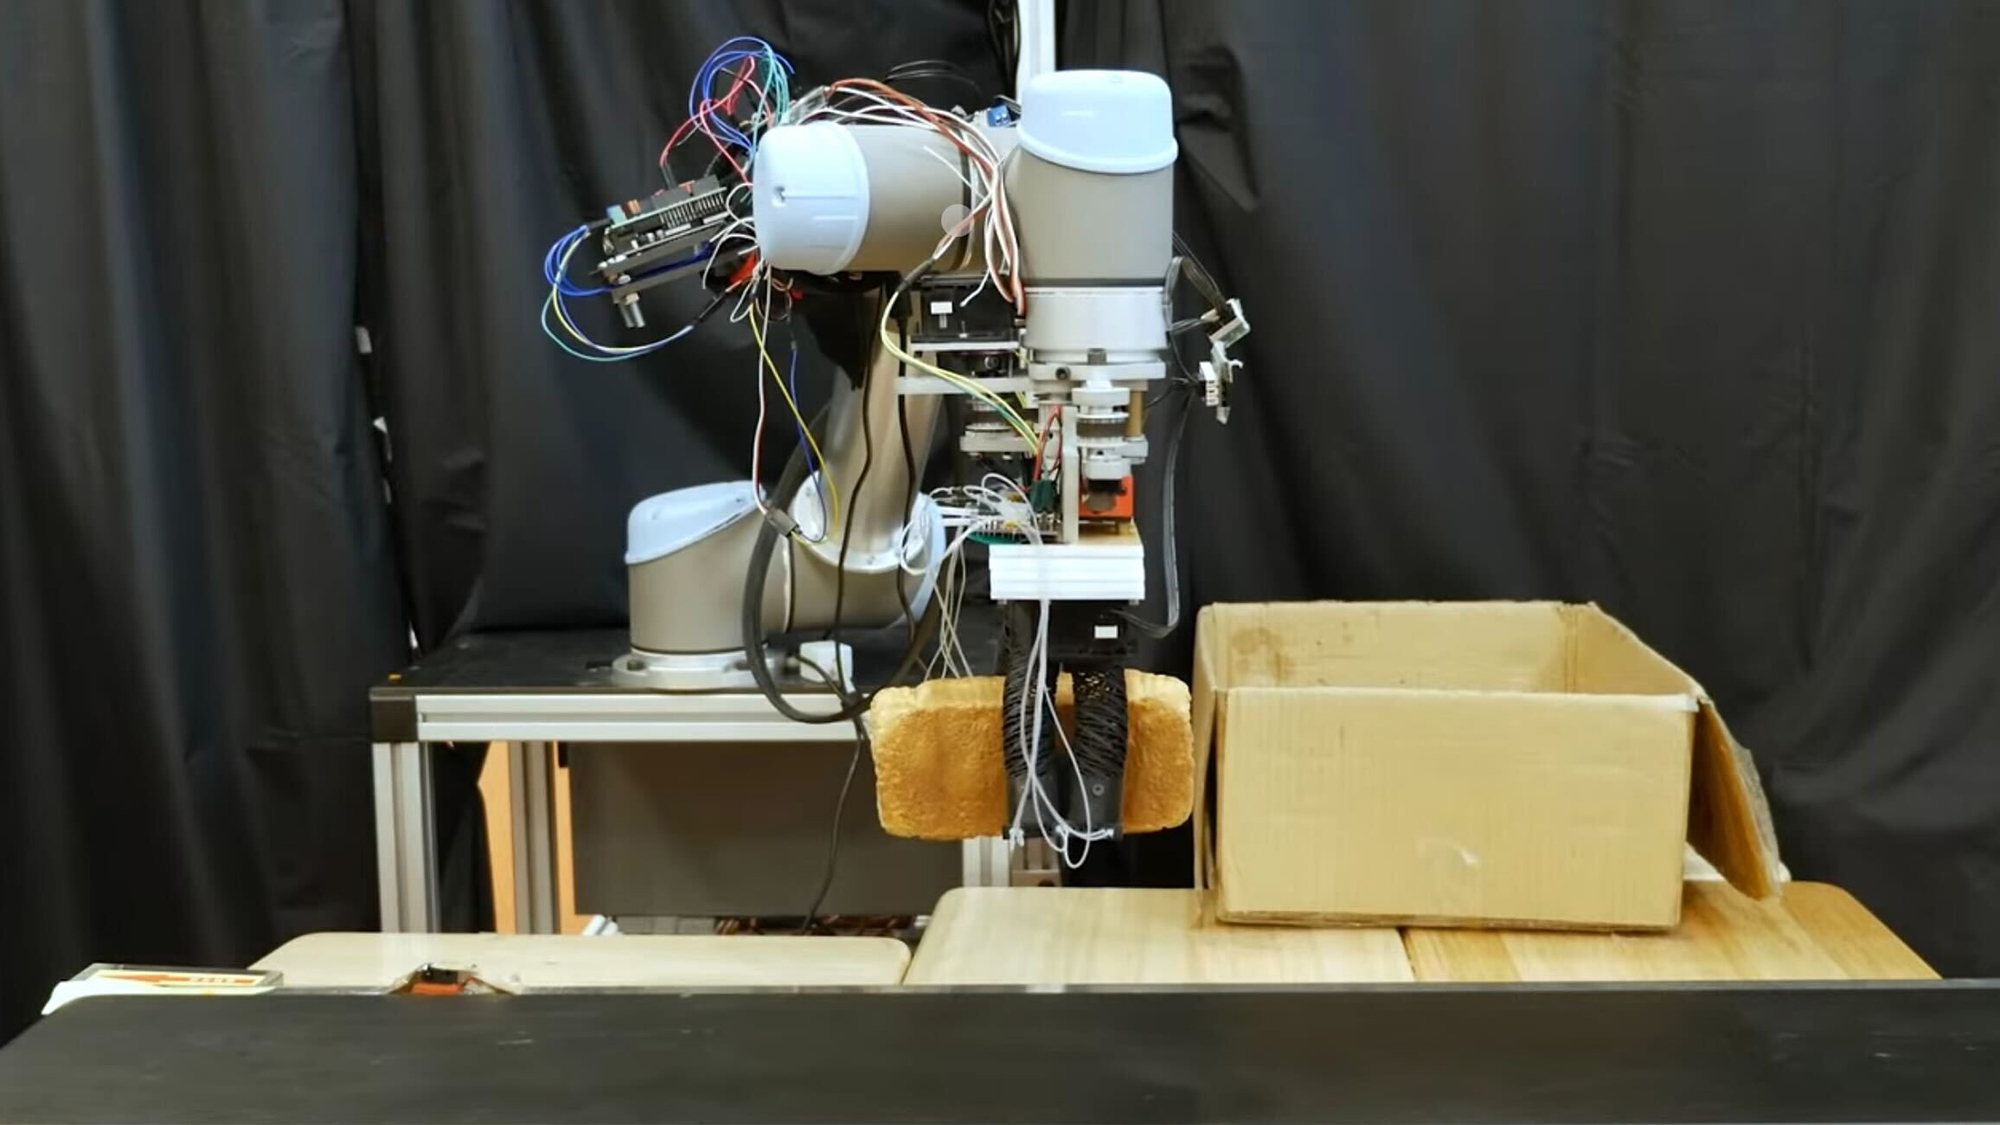 Can grocery-packing robots make the self-checkout process less tedious?